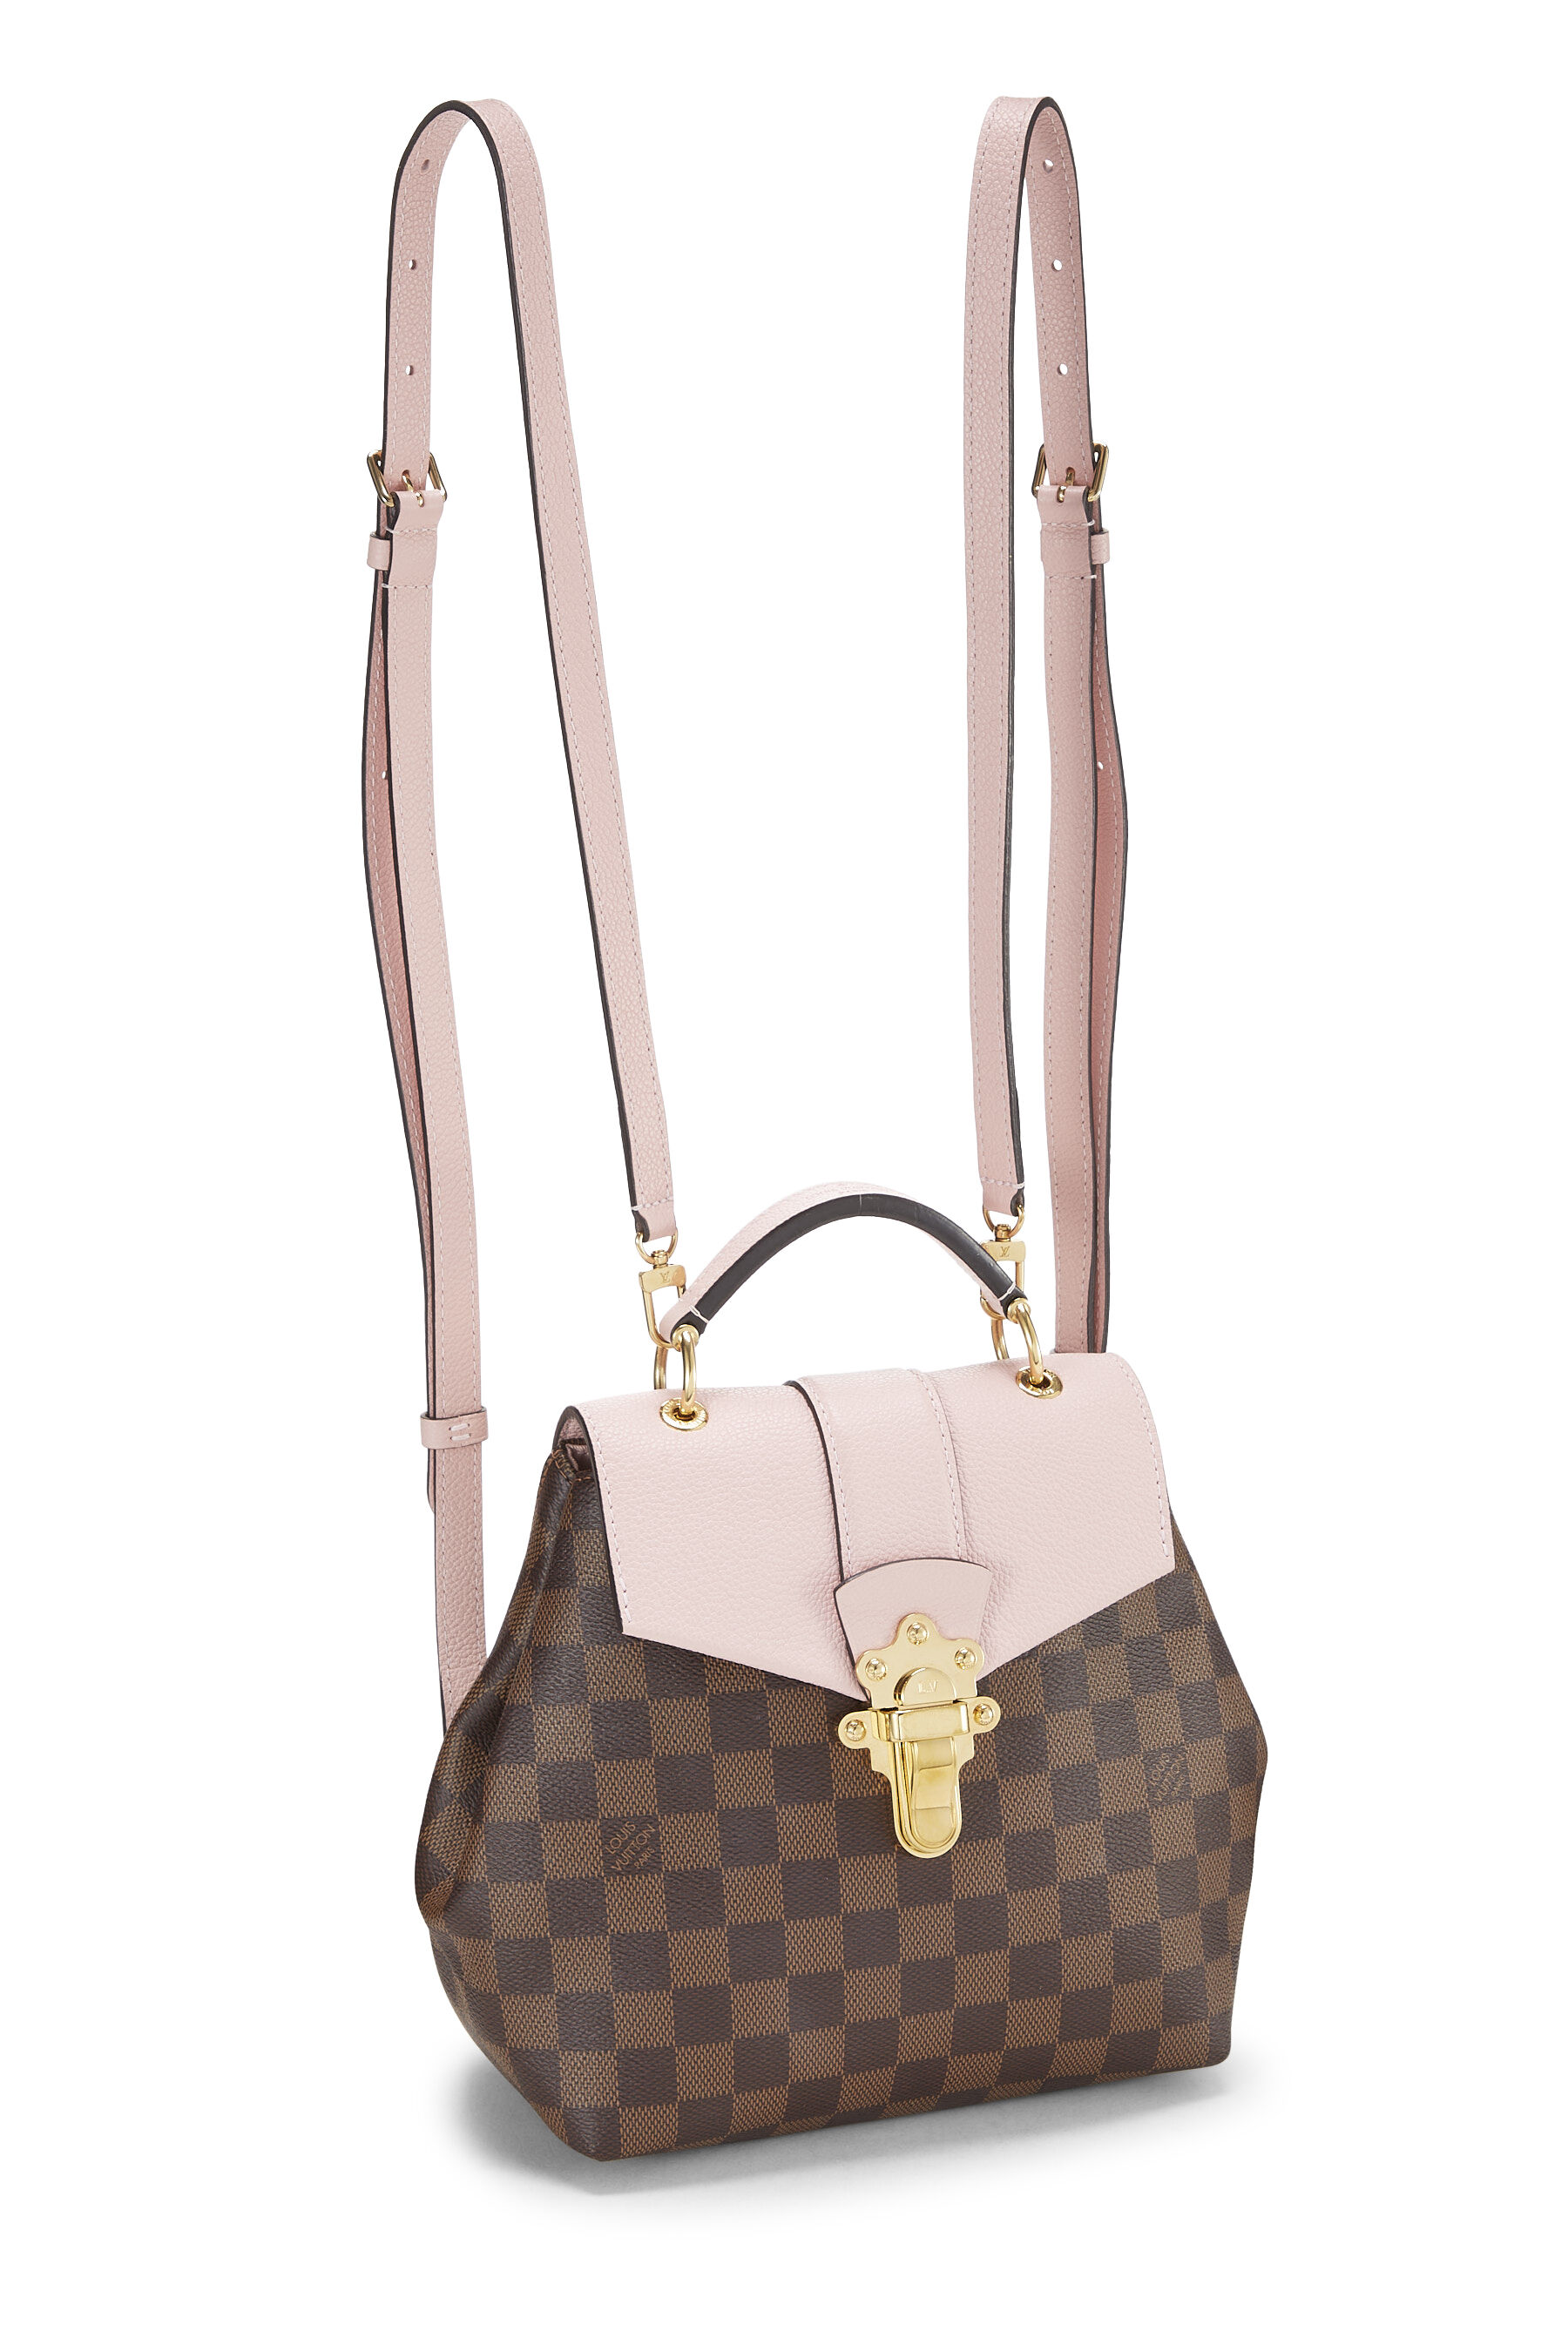 Louis Vuitton Clapton Backpack Damier Brown Canvas Leather Pink